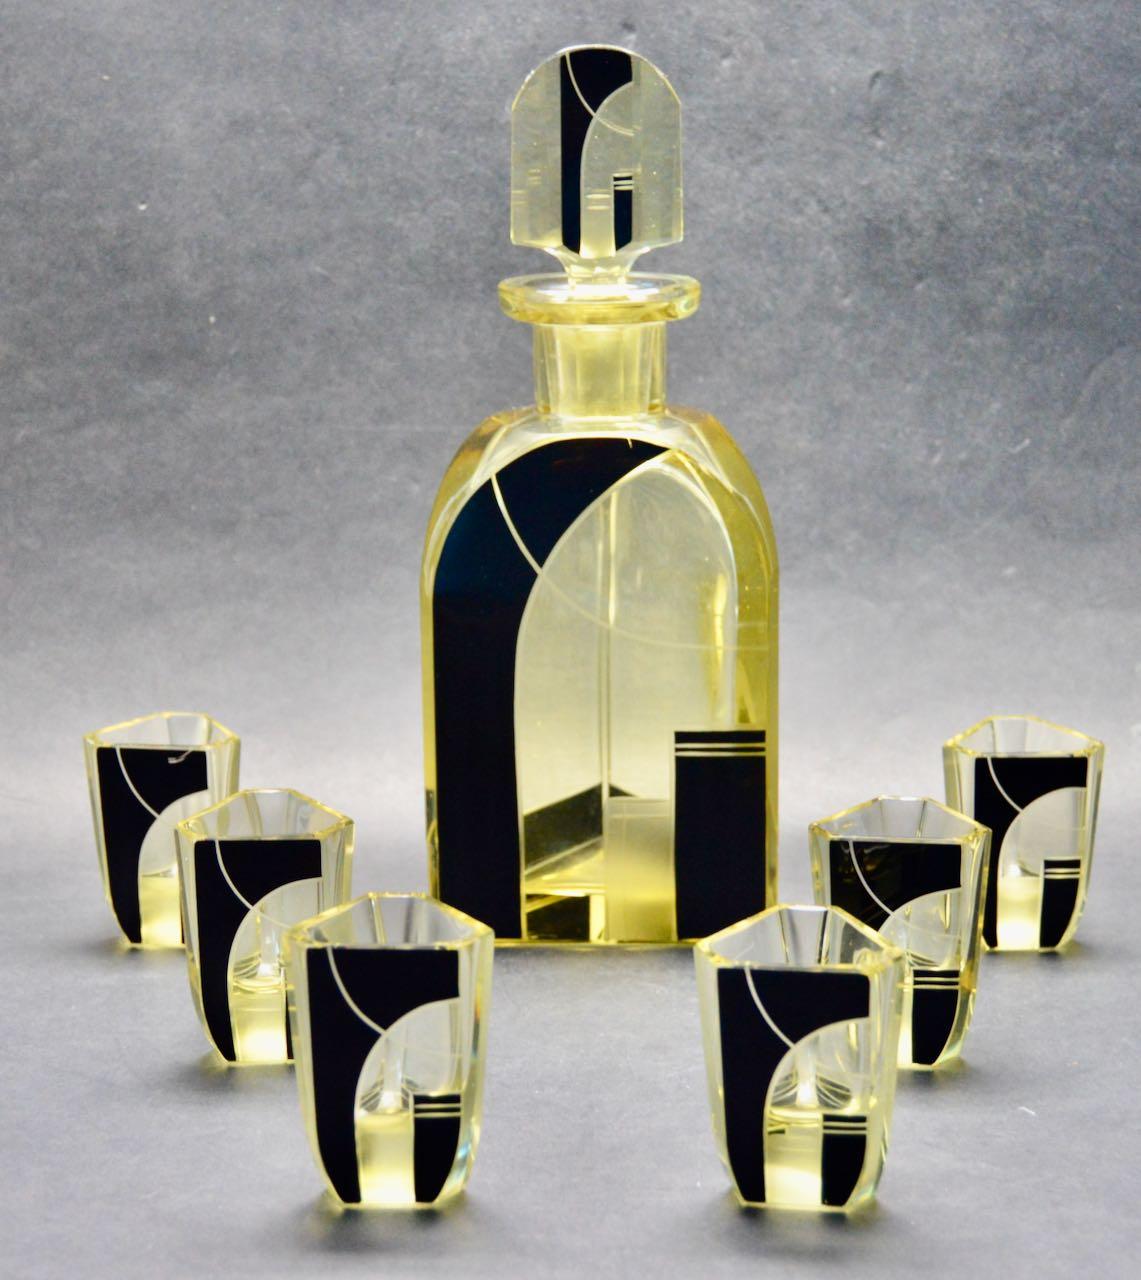 Czech Art Deco Decanter Drinking and Whiskey Set by Karl Palda